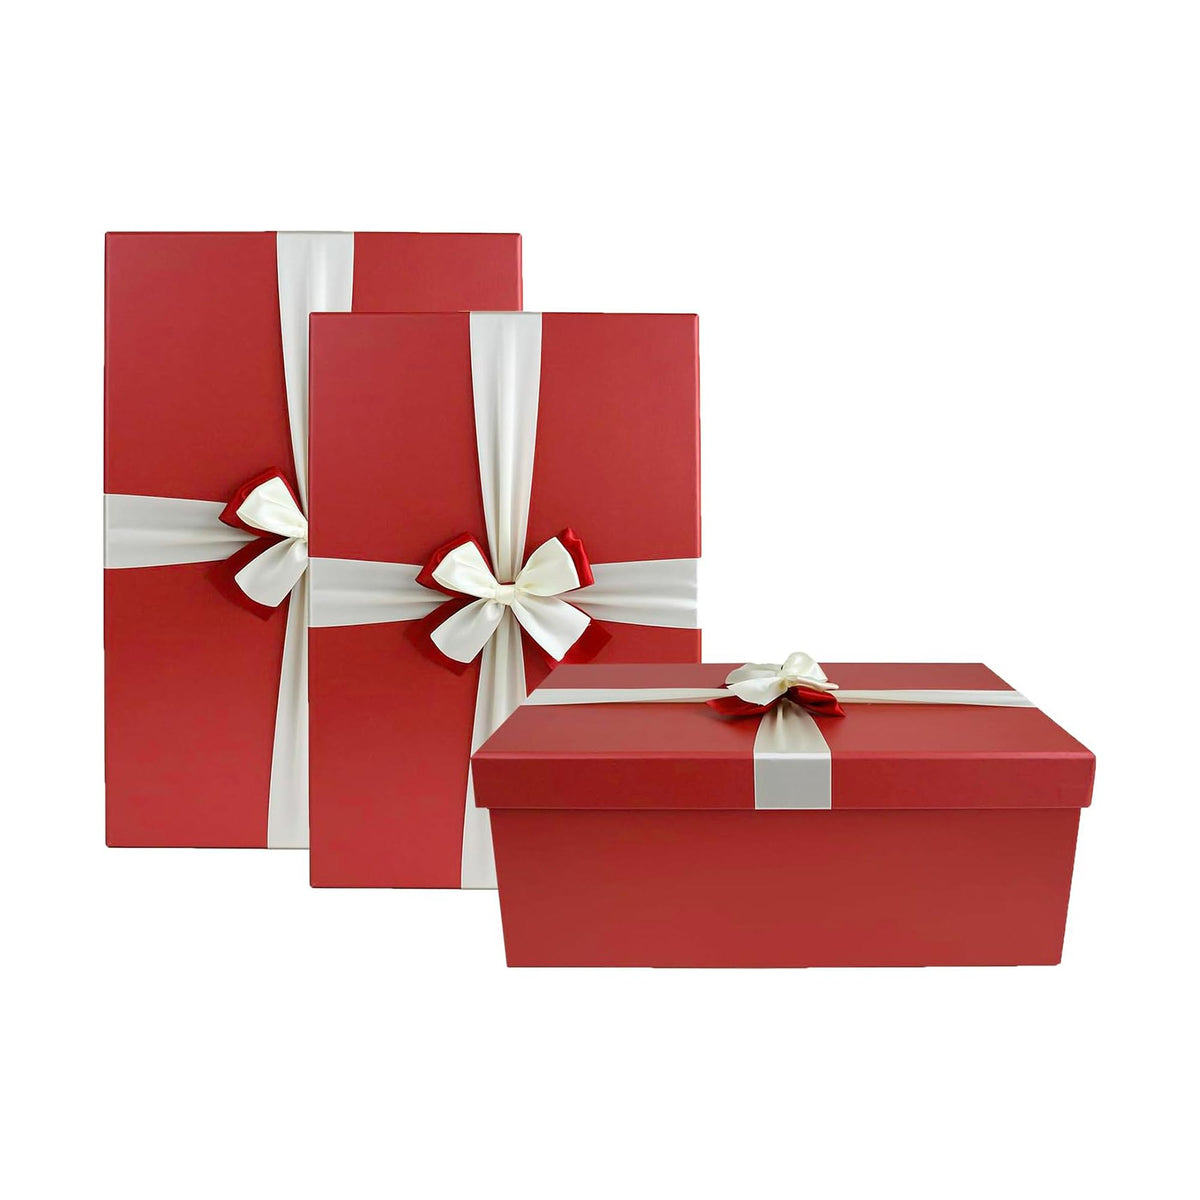 Luxury Oversized Red Gift Boxes - Set of 3